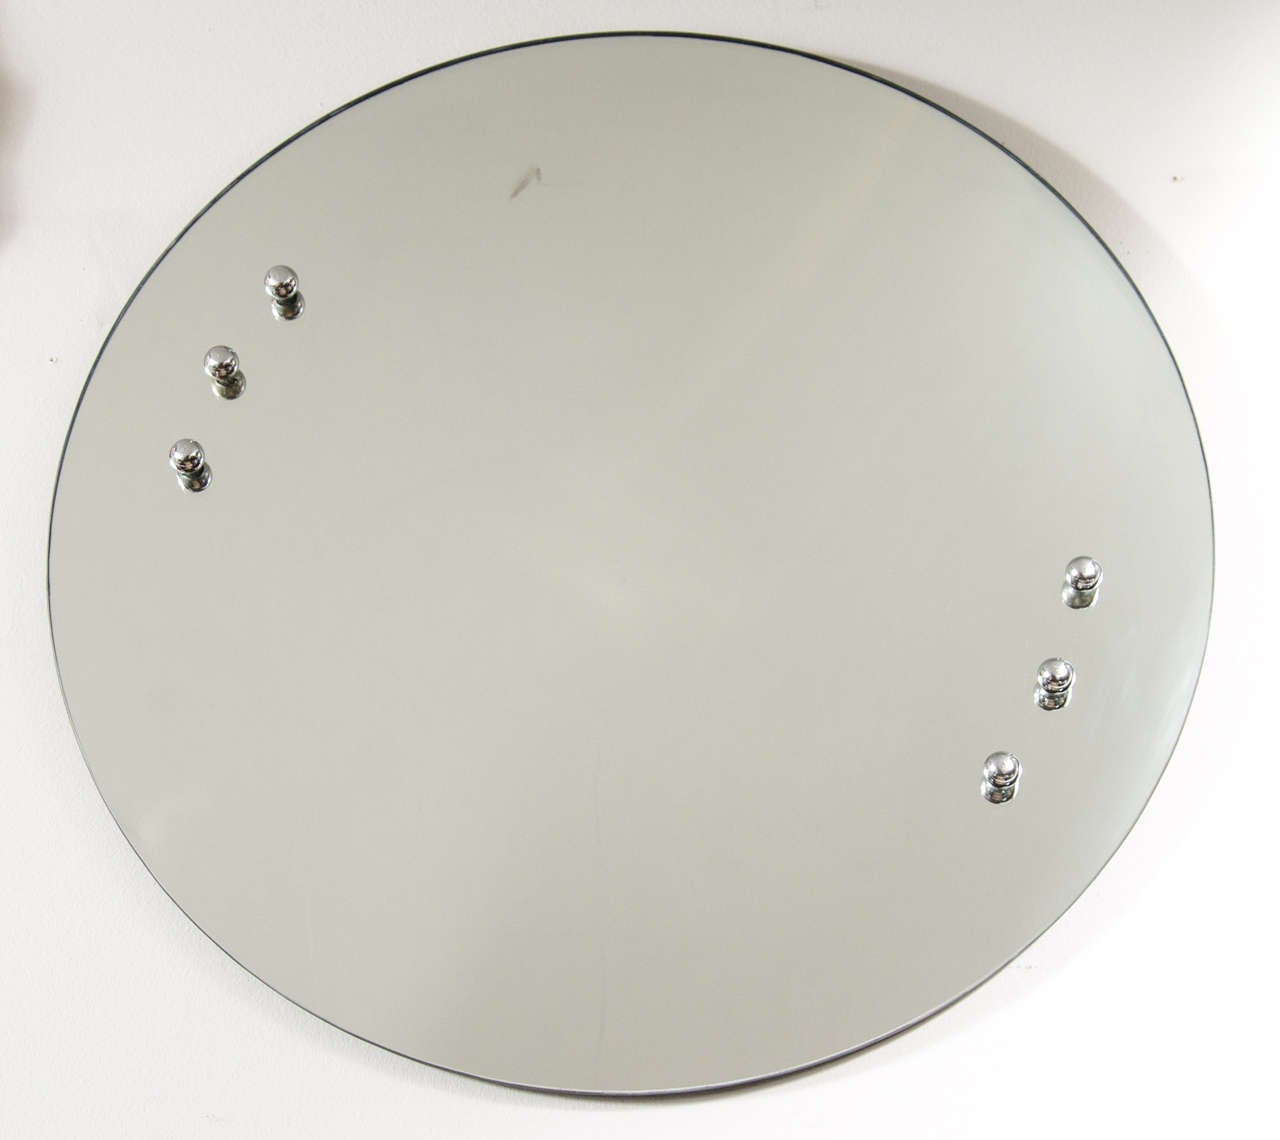 This stunning round mirror is by Donald Deskey the foremost designer of the Art Deco period in America. It is accented with chrome ball detailing.